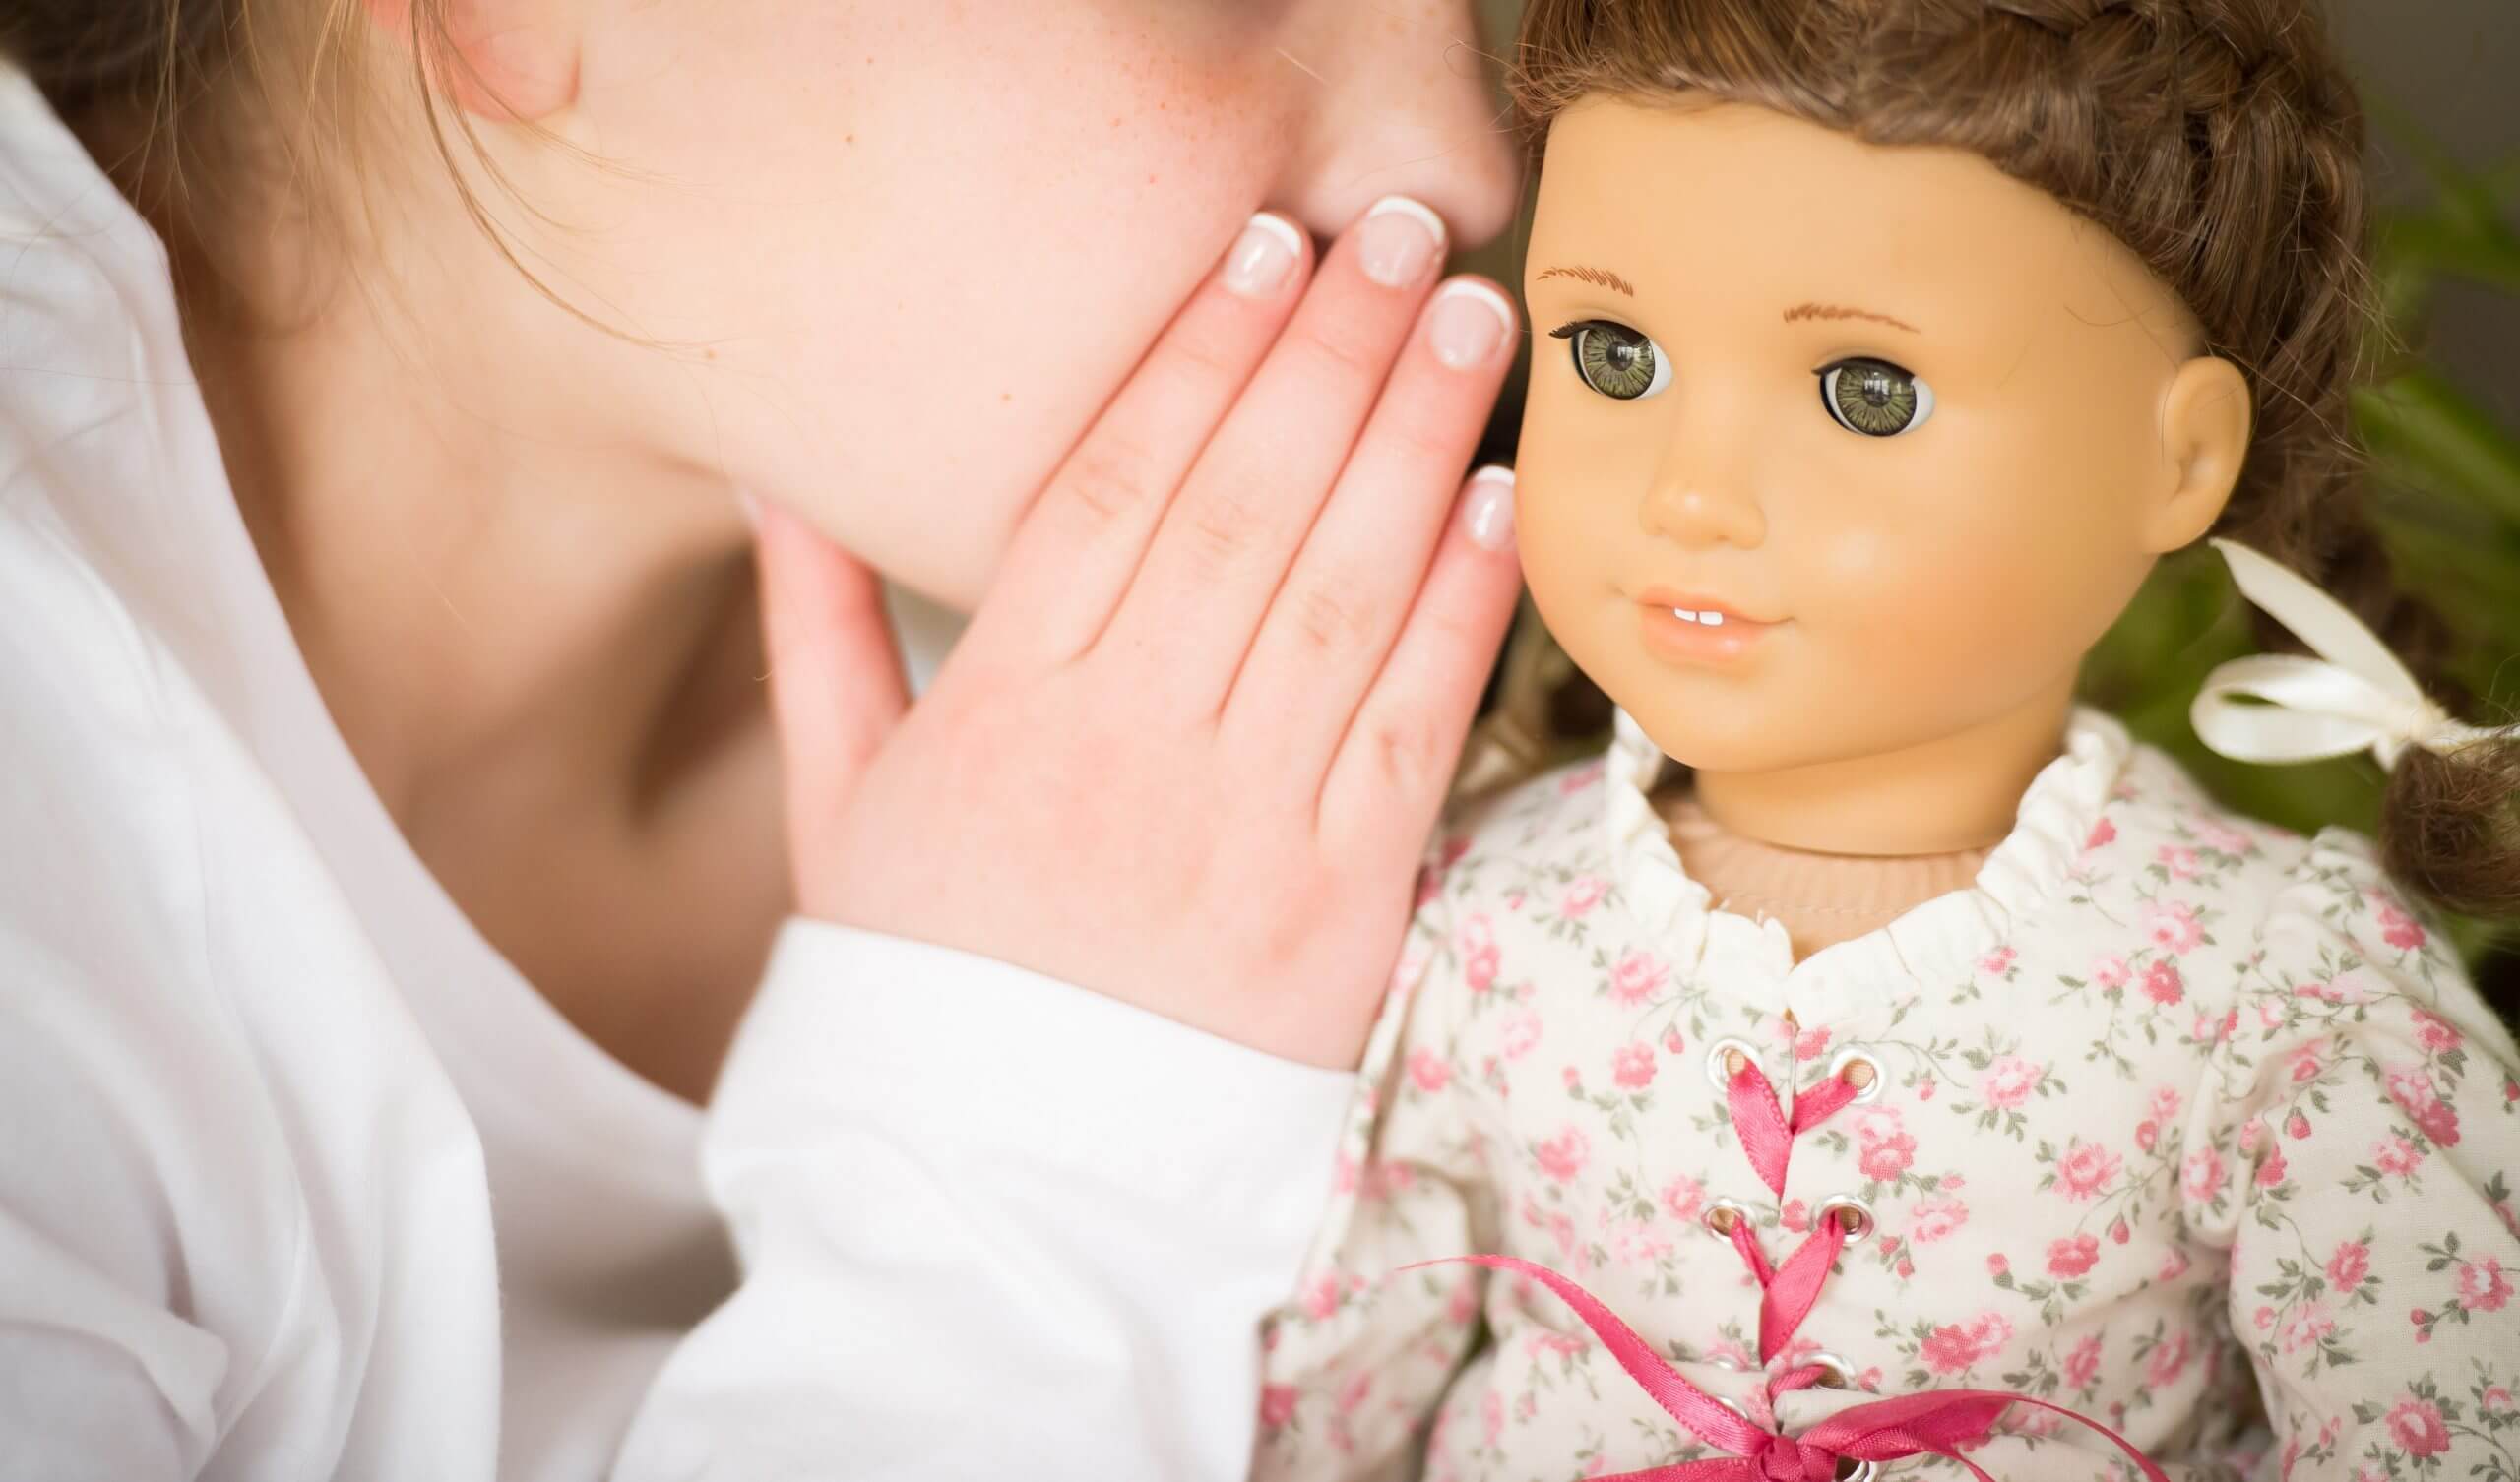 A girl whispers in the ear of a doll.